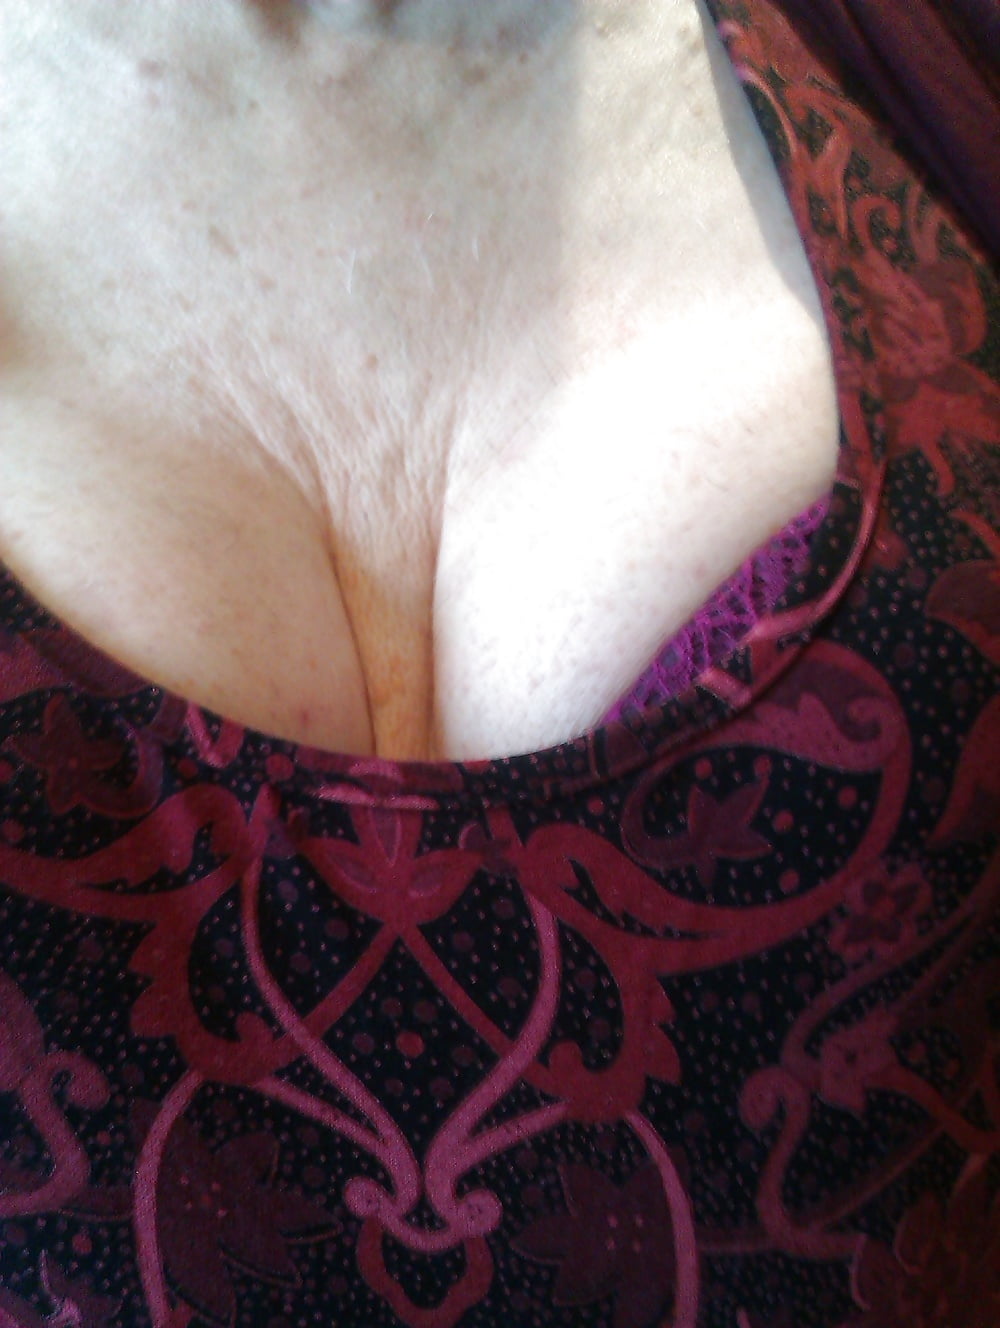 Cleavage Bra - See and Save As new bra shows my cleavage porn pict - 4crot.com